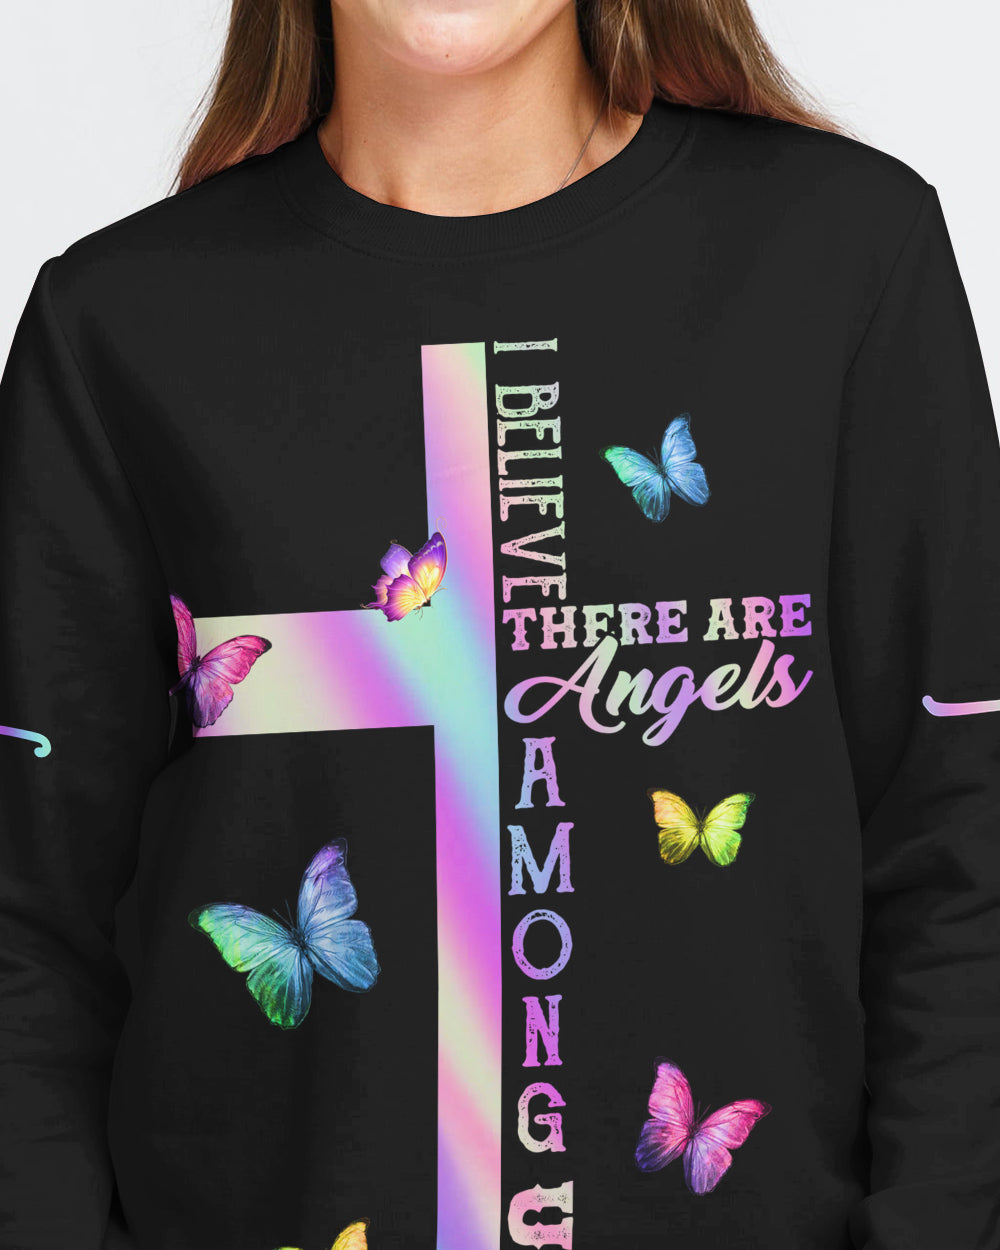 I Believe There Are Angles Among Us Colorful Butterfly Women's Christian Sweatshirt